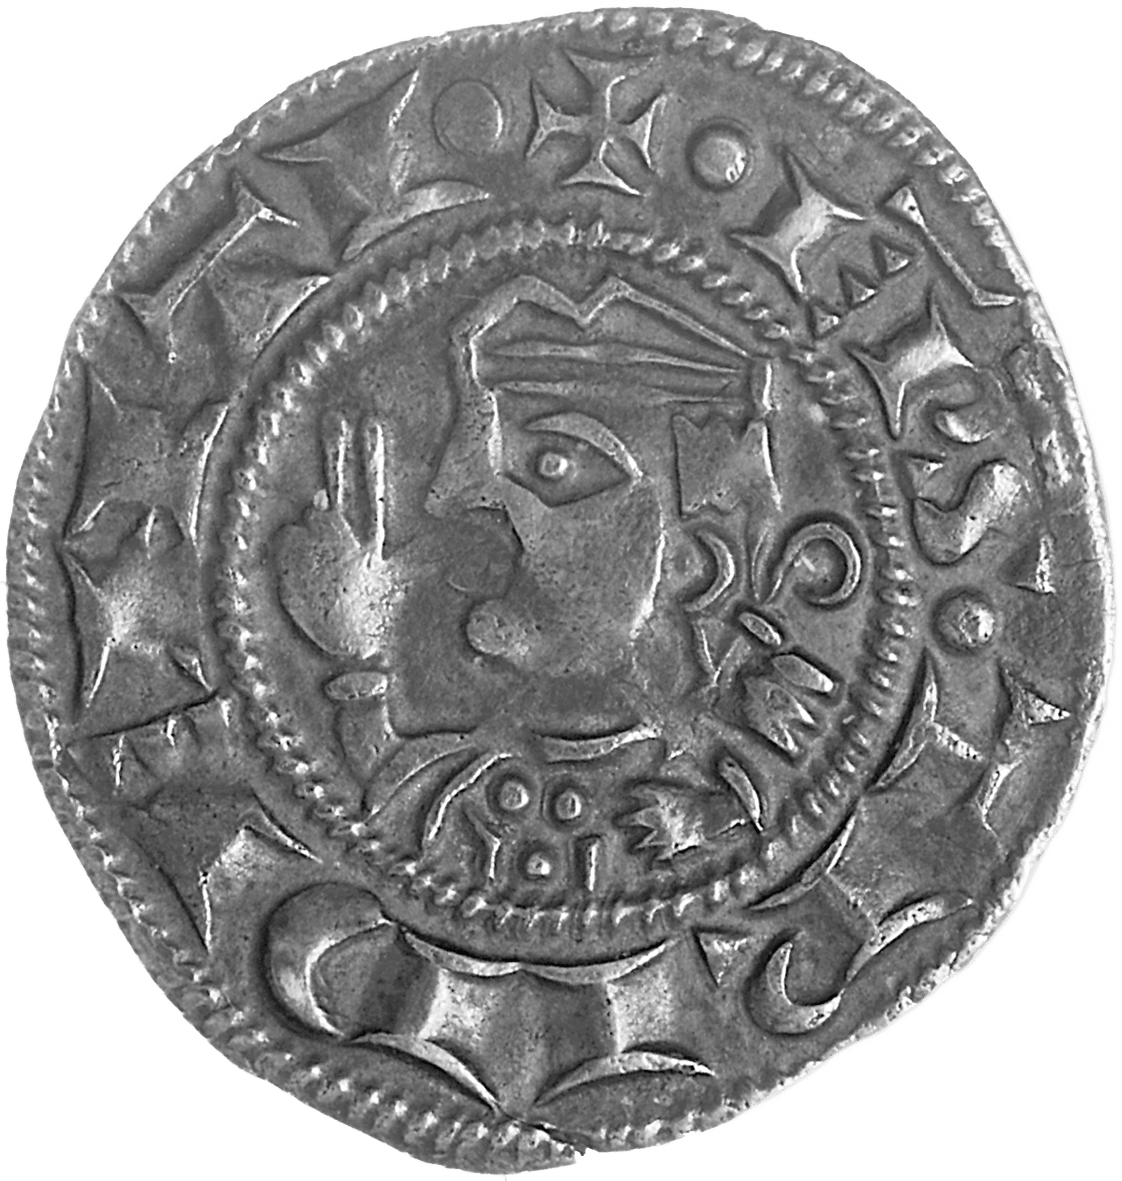 Holy Roman Empire, Archdiocese of Trento, Egnone d'Appiano, Grosso (obverse)